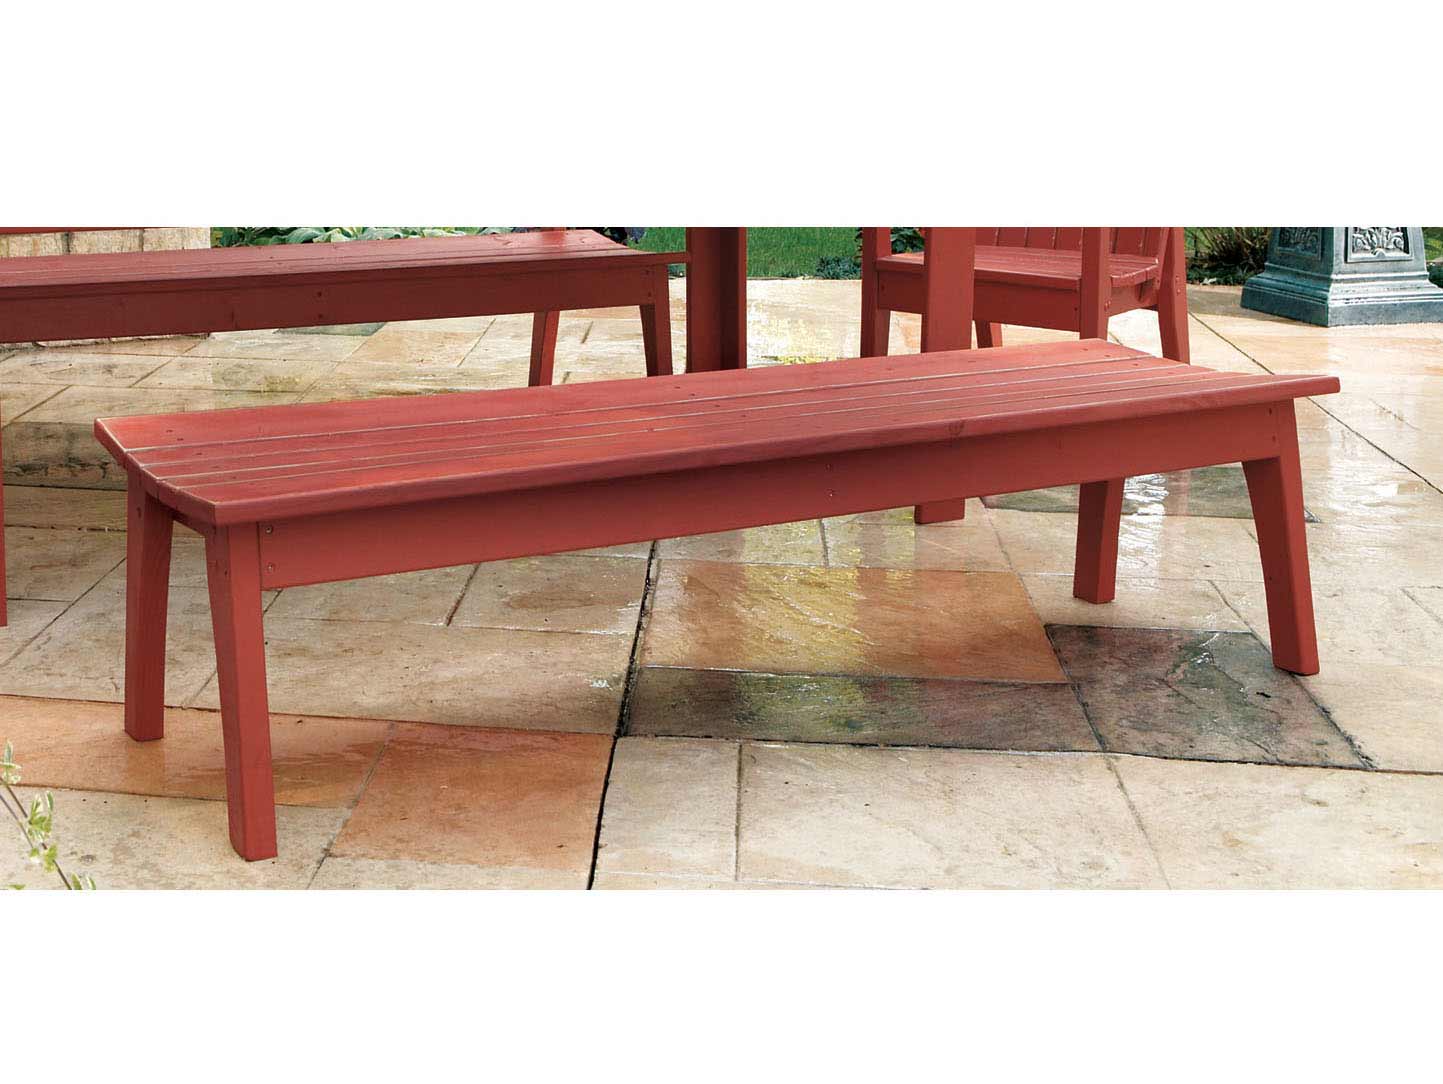 Behrens Four Seat Backless Bench